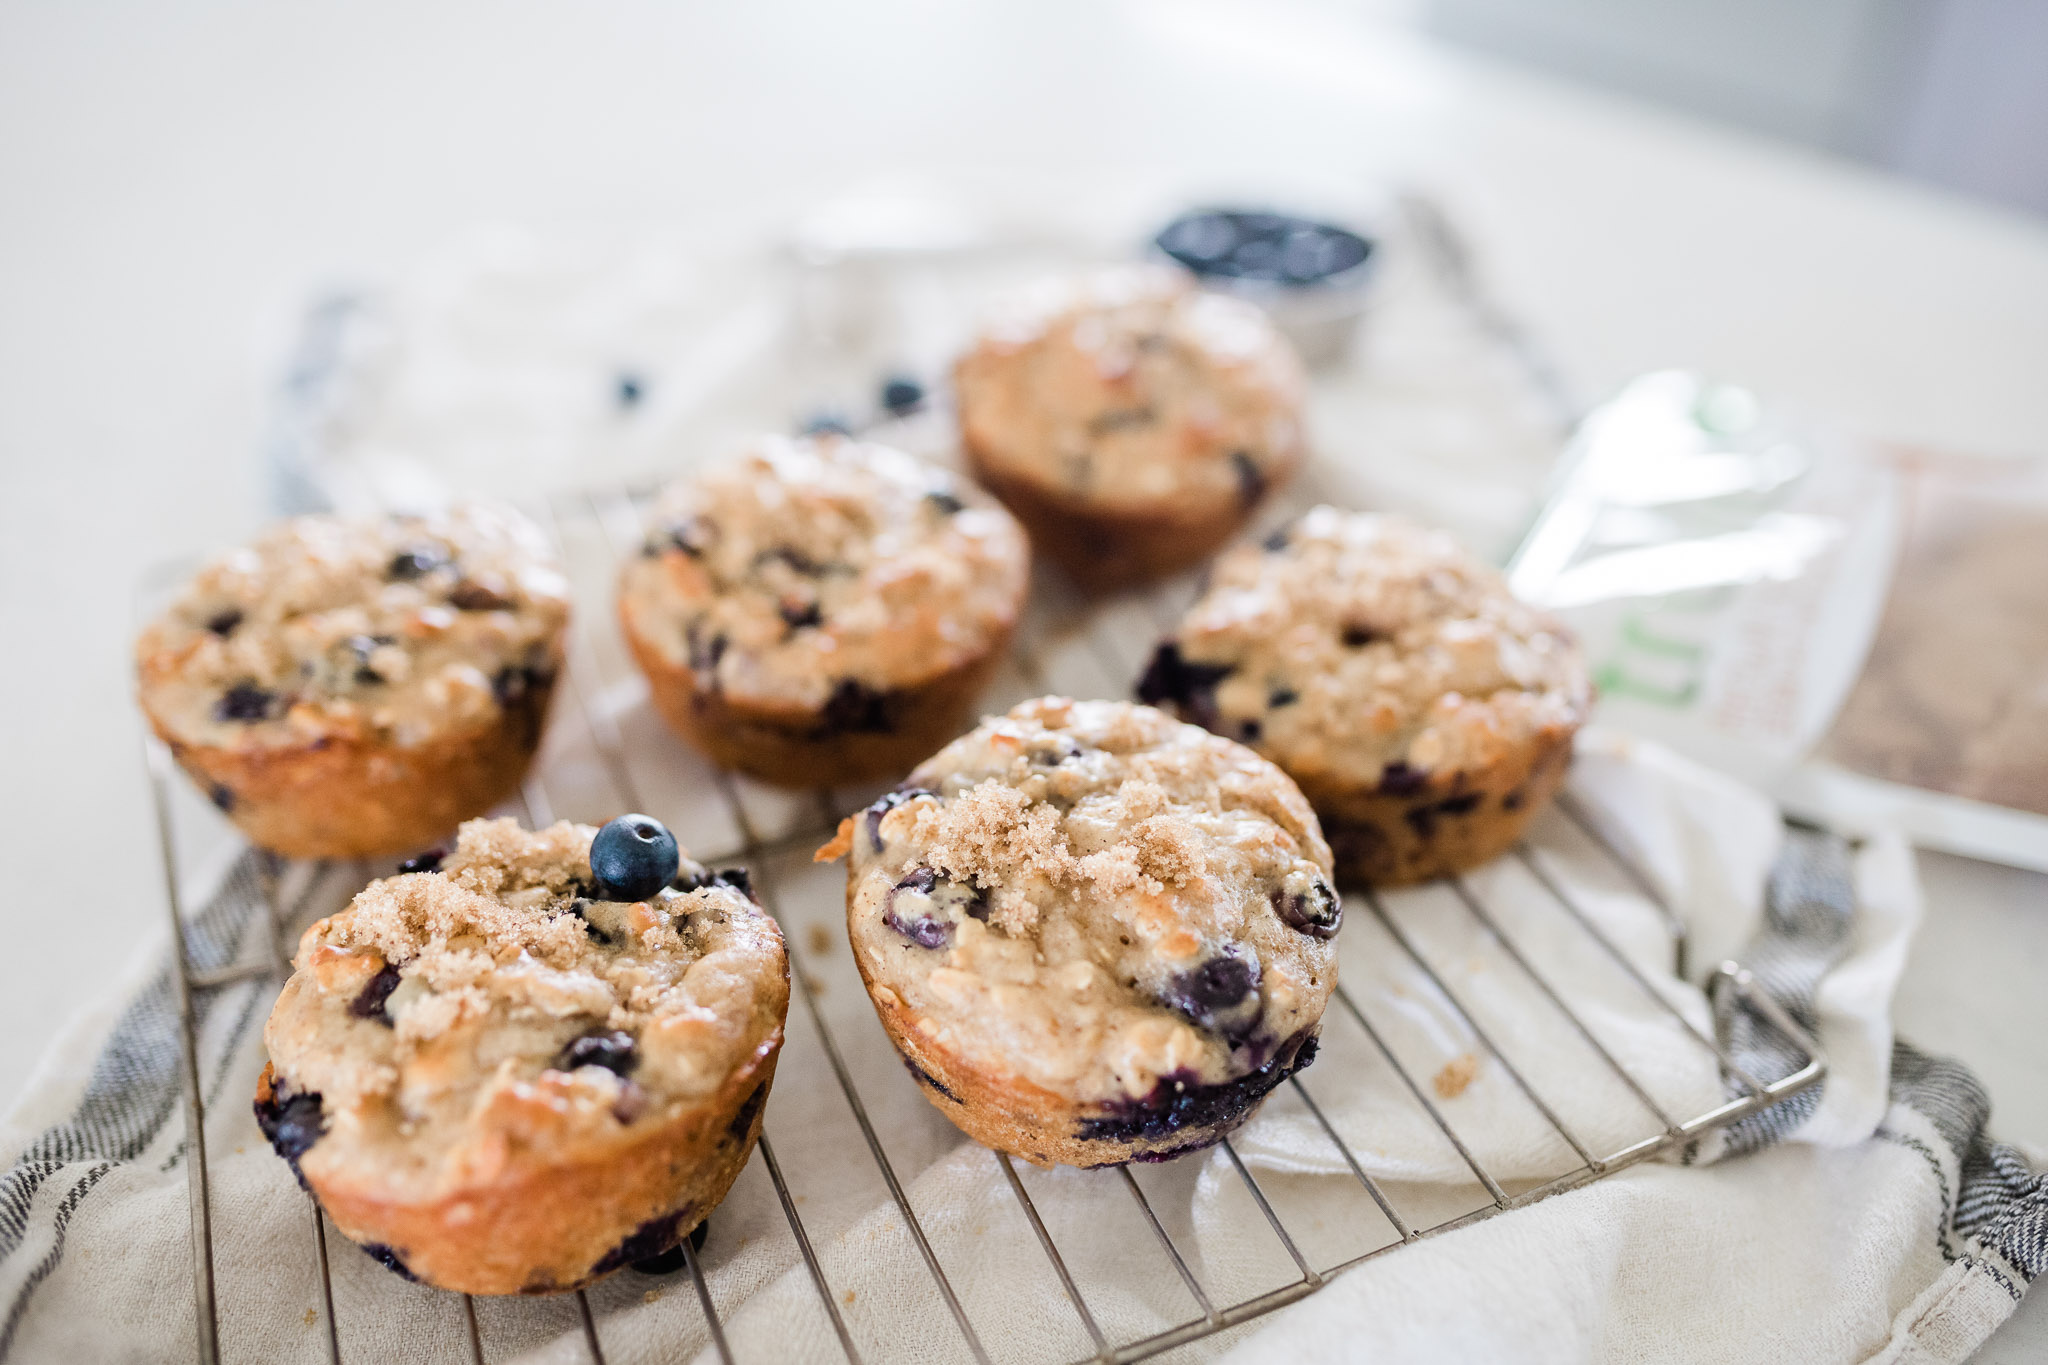 For those busy mornings on the go, make a batch of blueberry oatmeal yogurt muffins made with Truvia Brown Sugar Blend. Also works well in mini muffins for a delicious treat @Truvia #breakfastmuffins #greekyogurt #oatmeal #ad